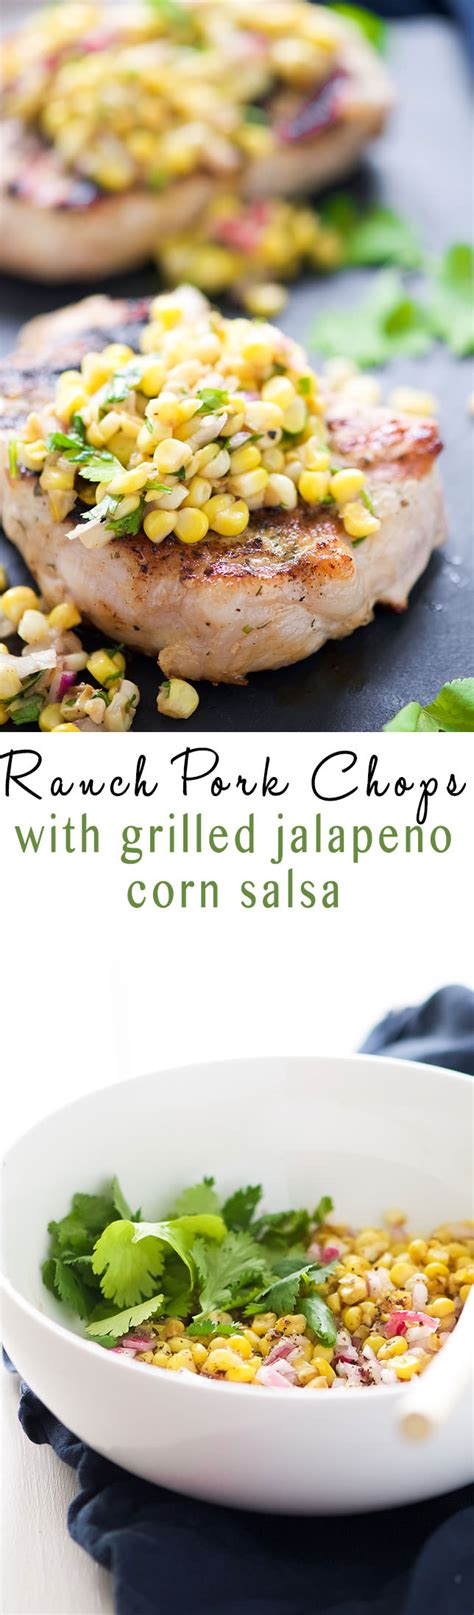 ranch-pork-chops-with-grilled-jalapeno-corn-salsa image